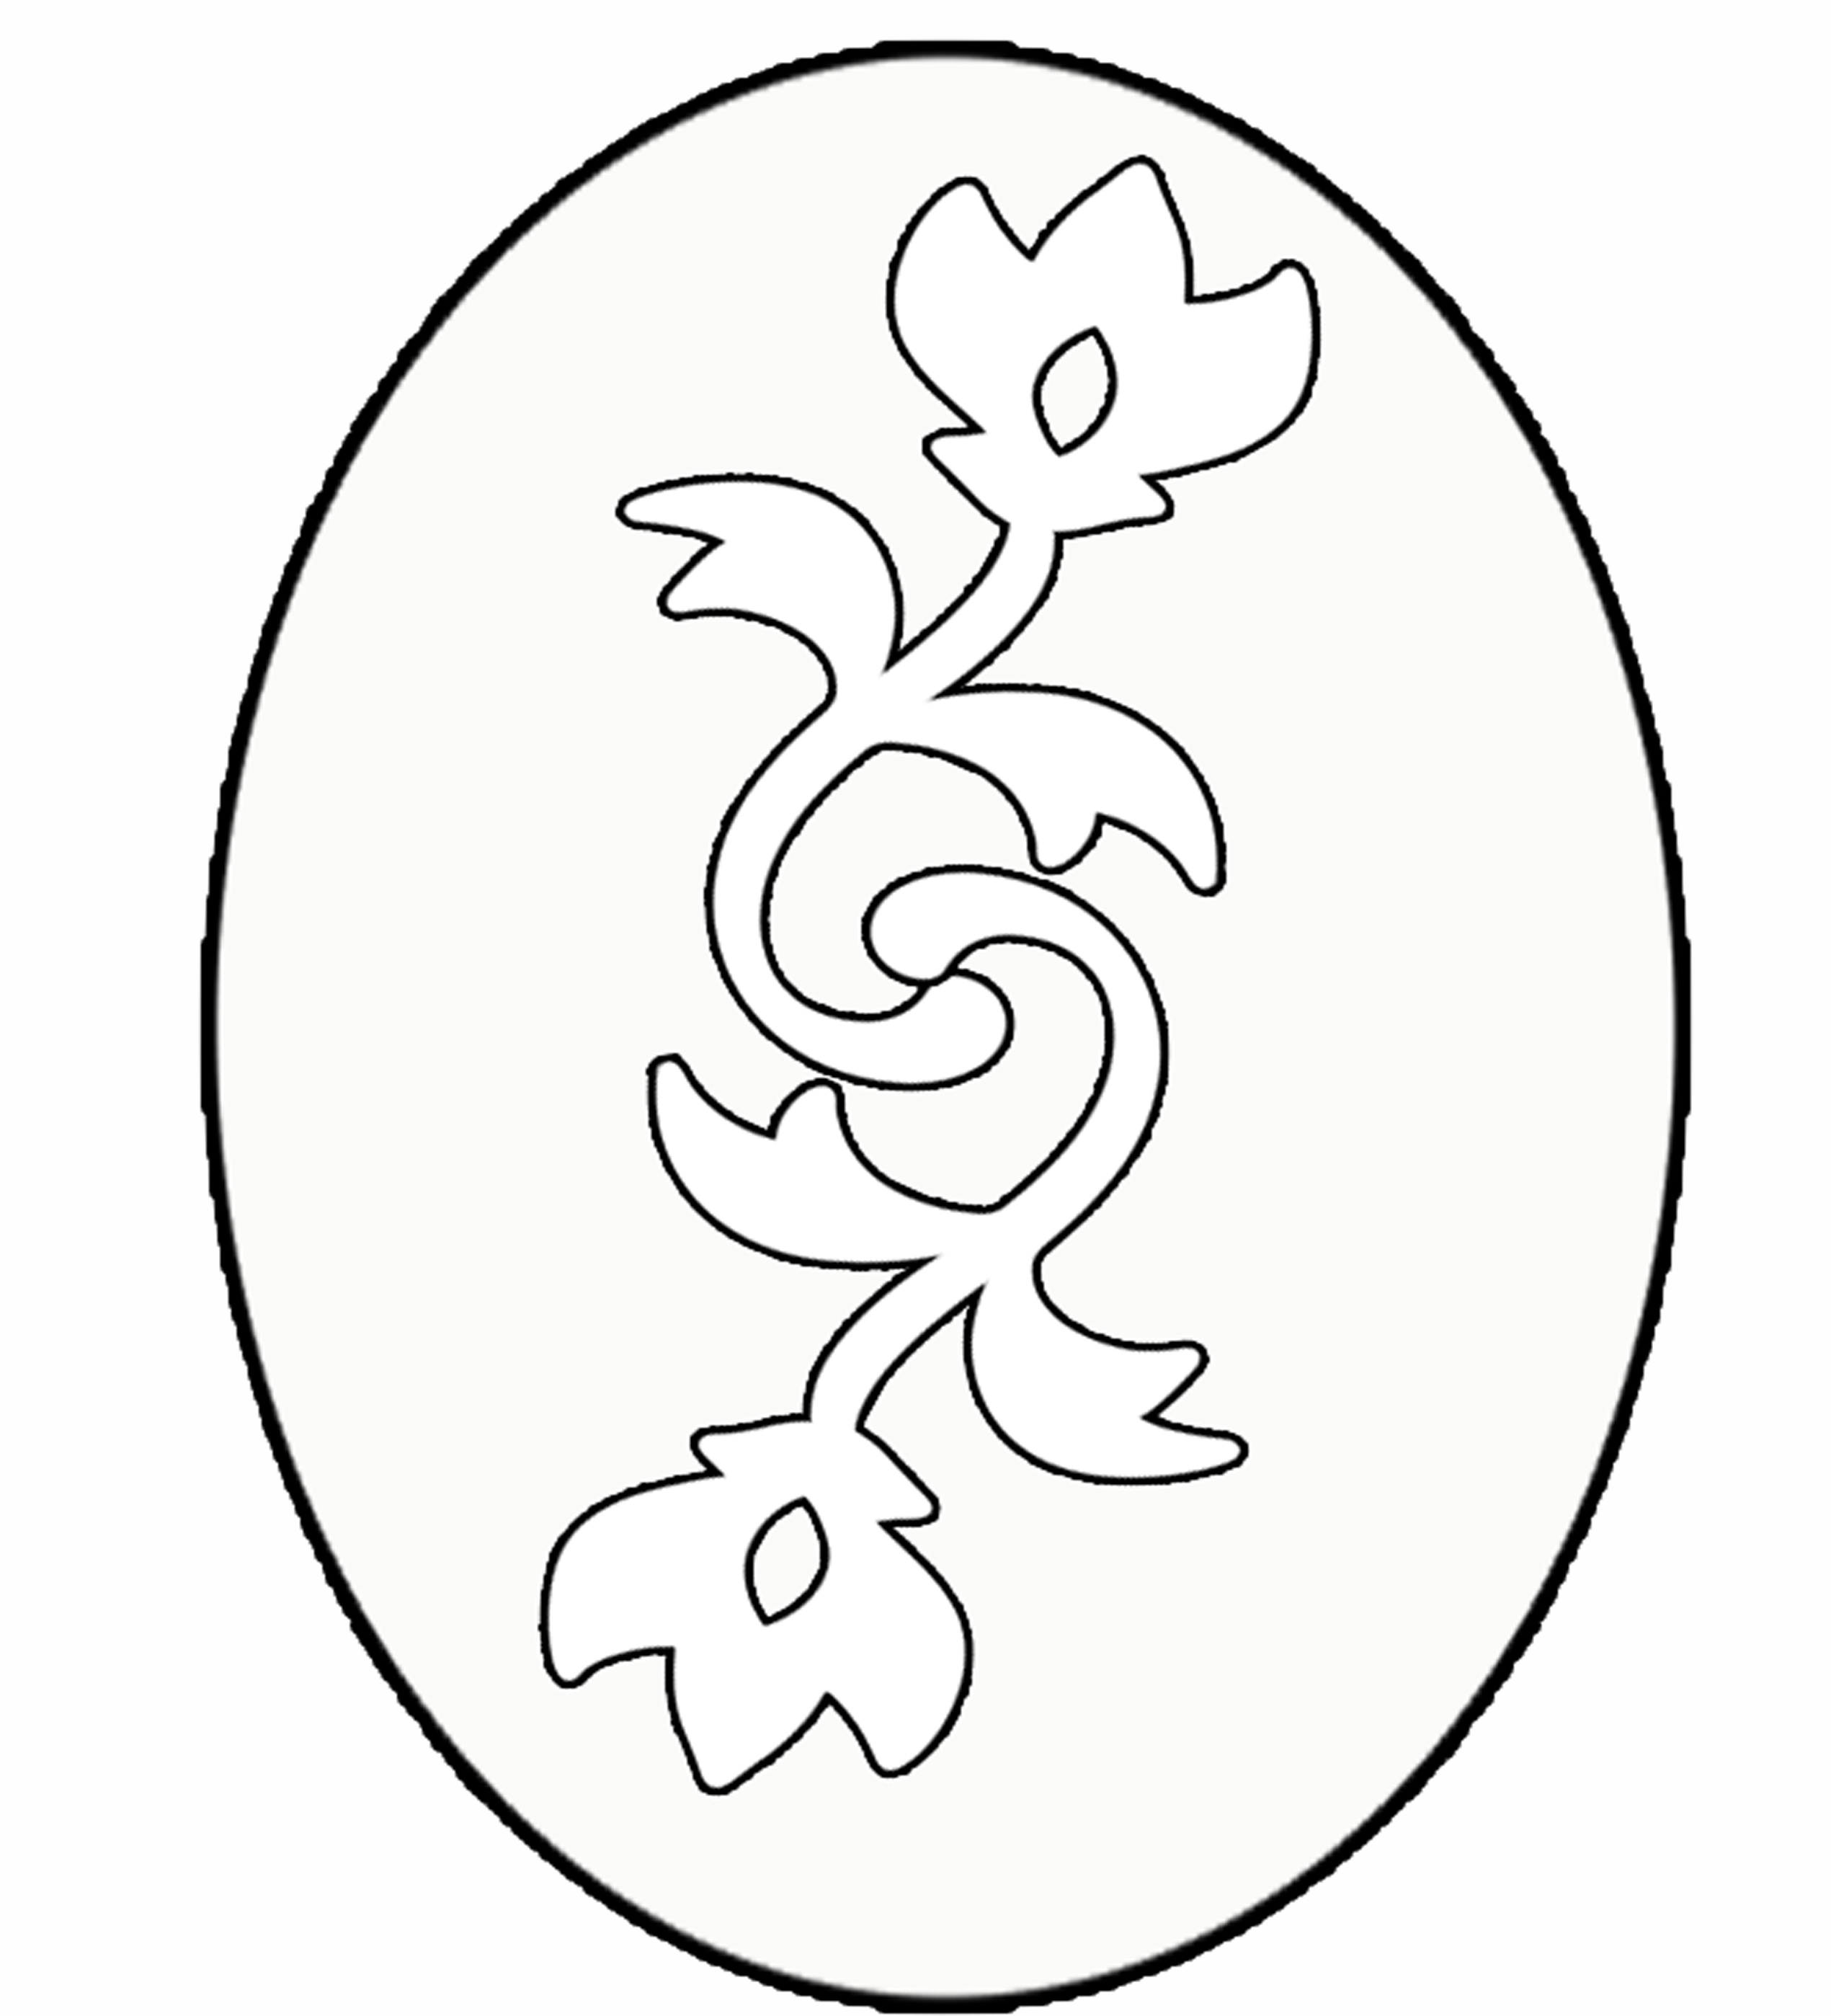 egg coloring page easter eggs coloring pages coloring pages for kids coloring page egg 